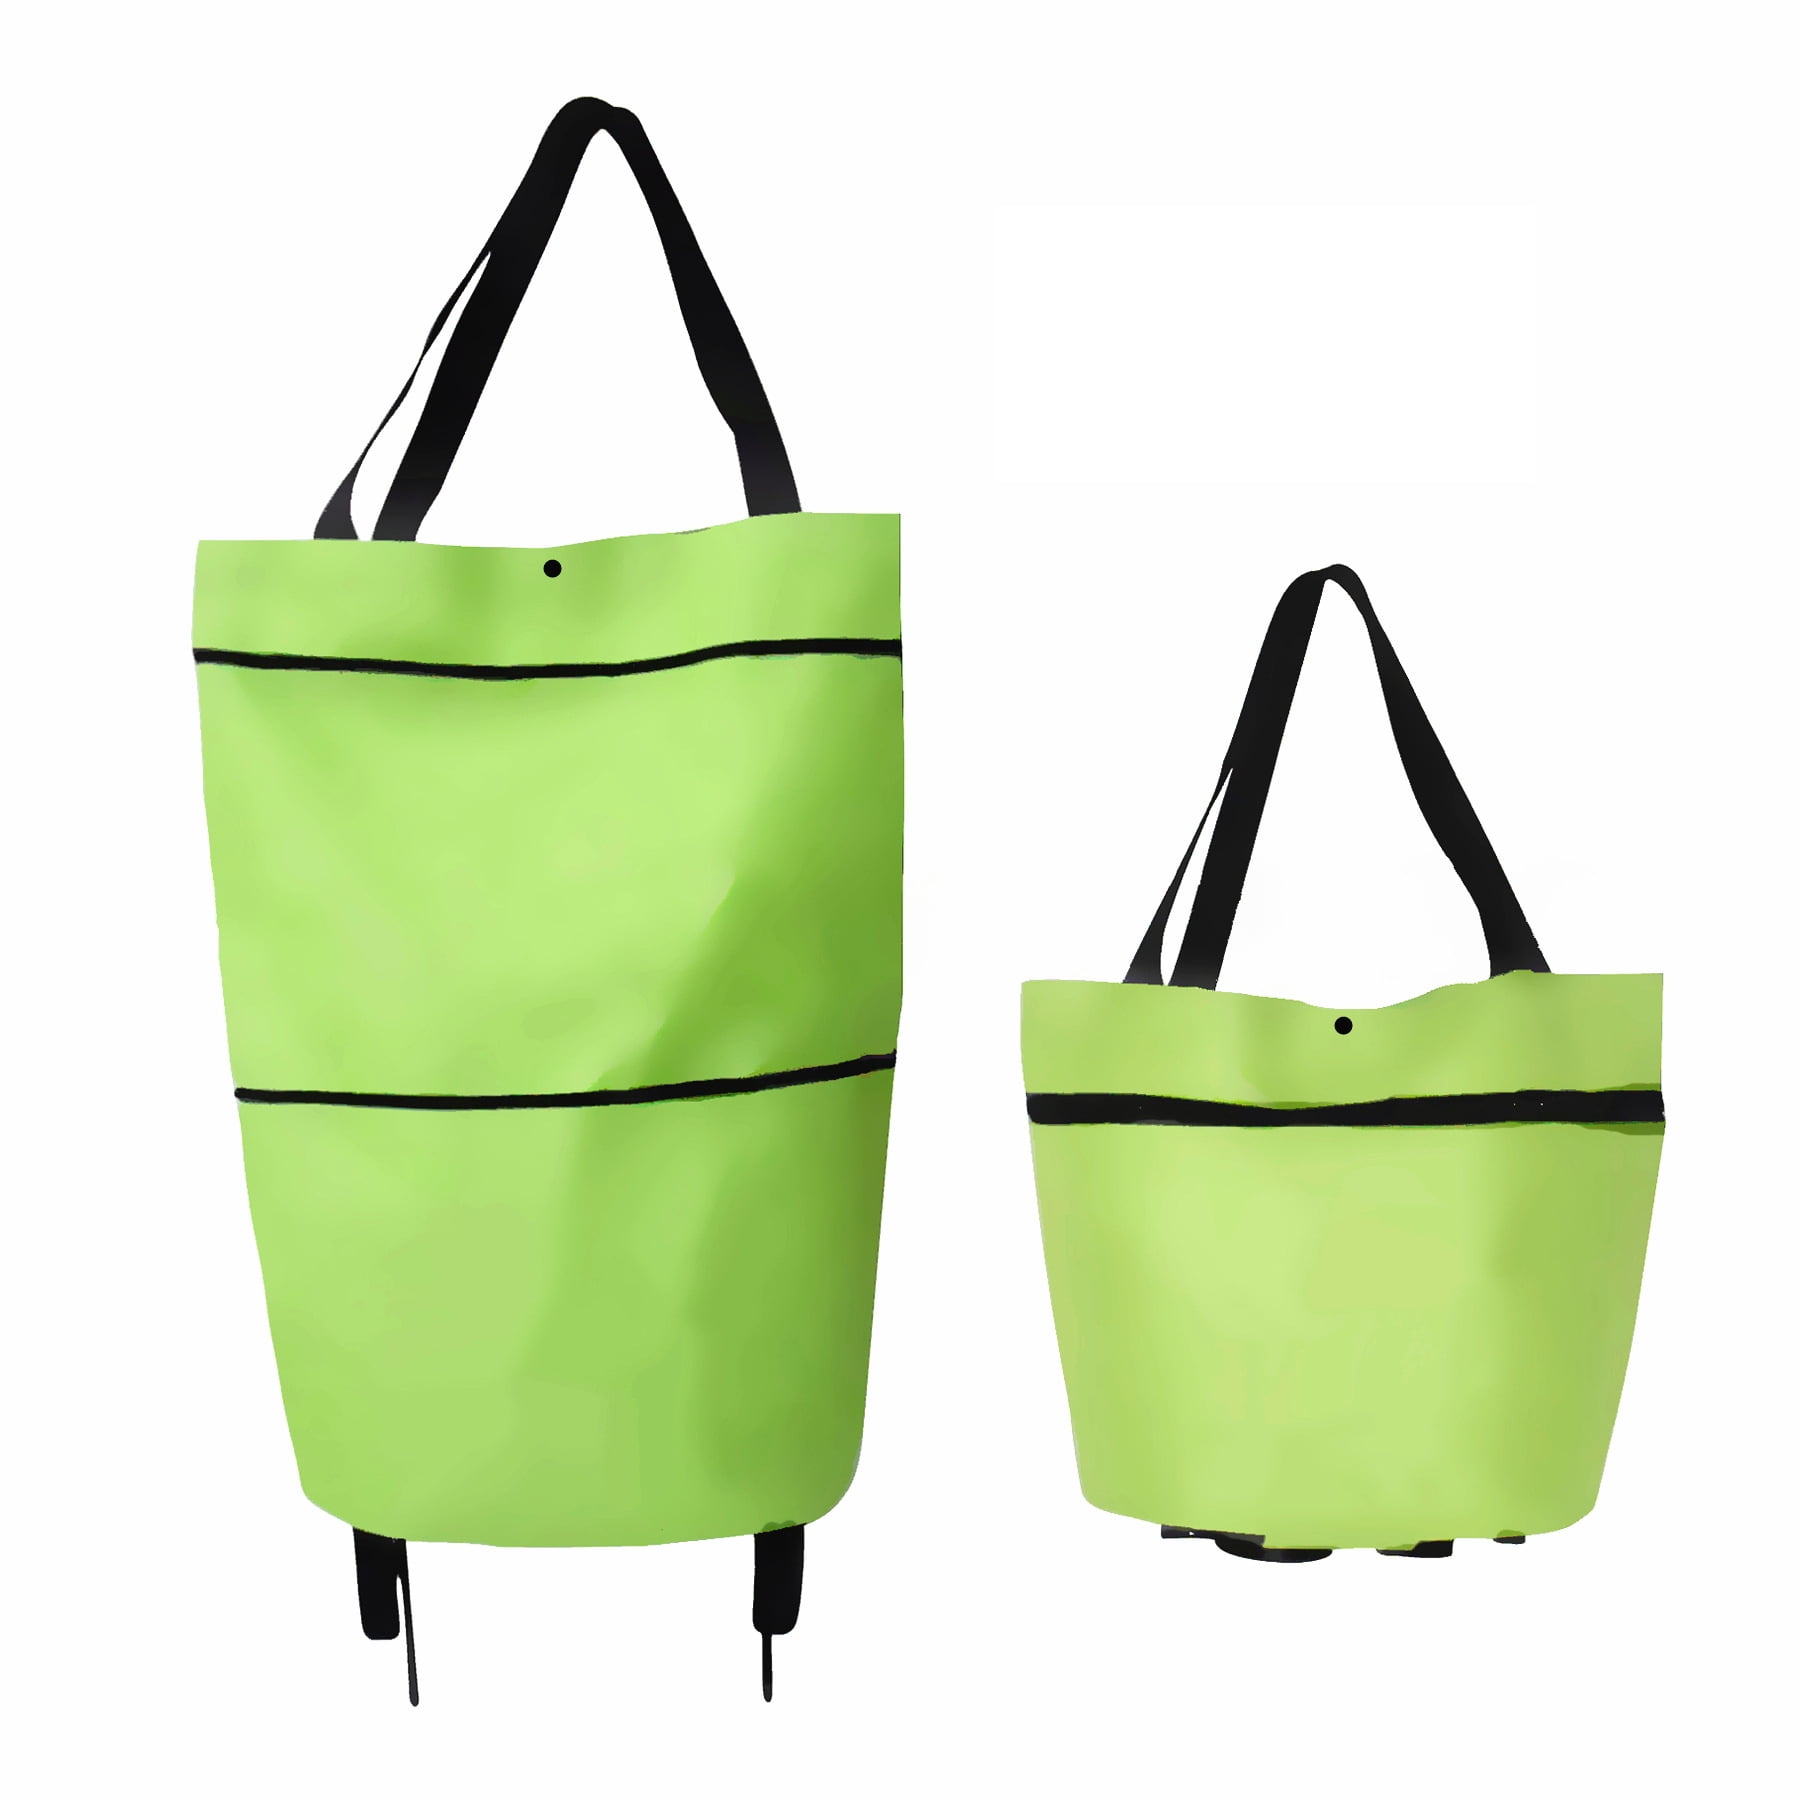 Details about   Foldable Shopping Bags With 2 Wheels Trolley Cart Large Storage Handbag 